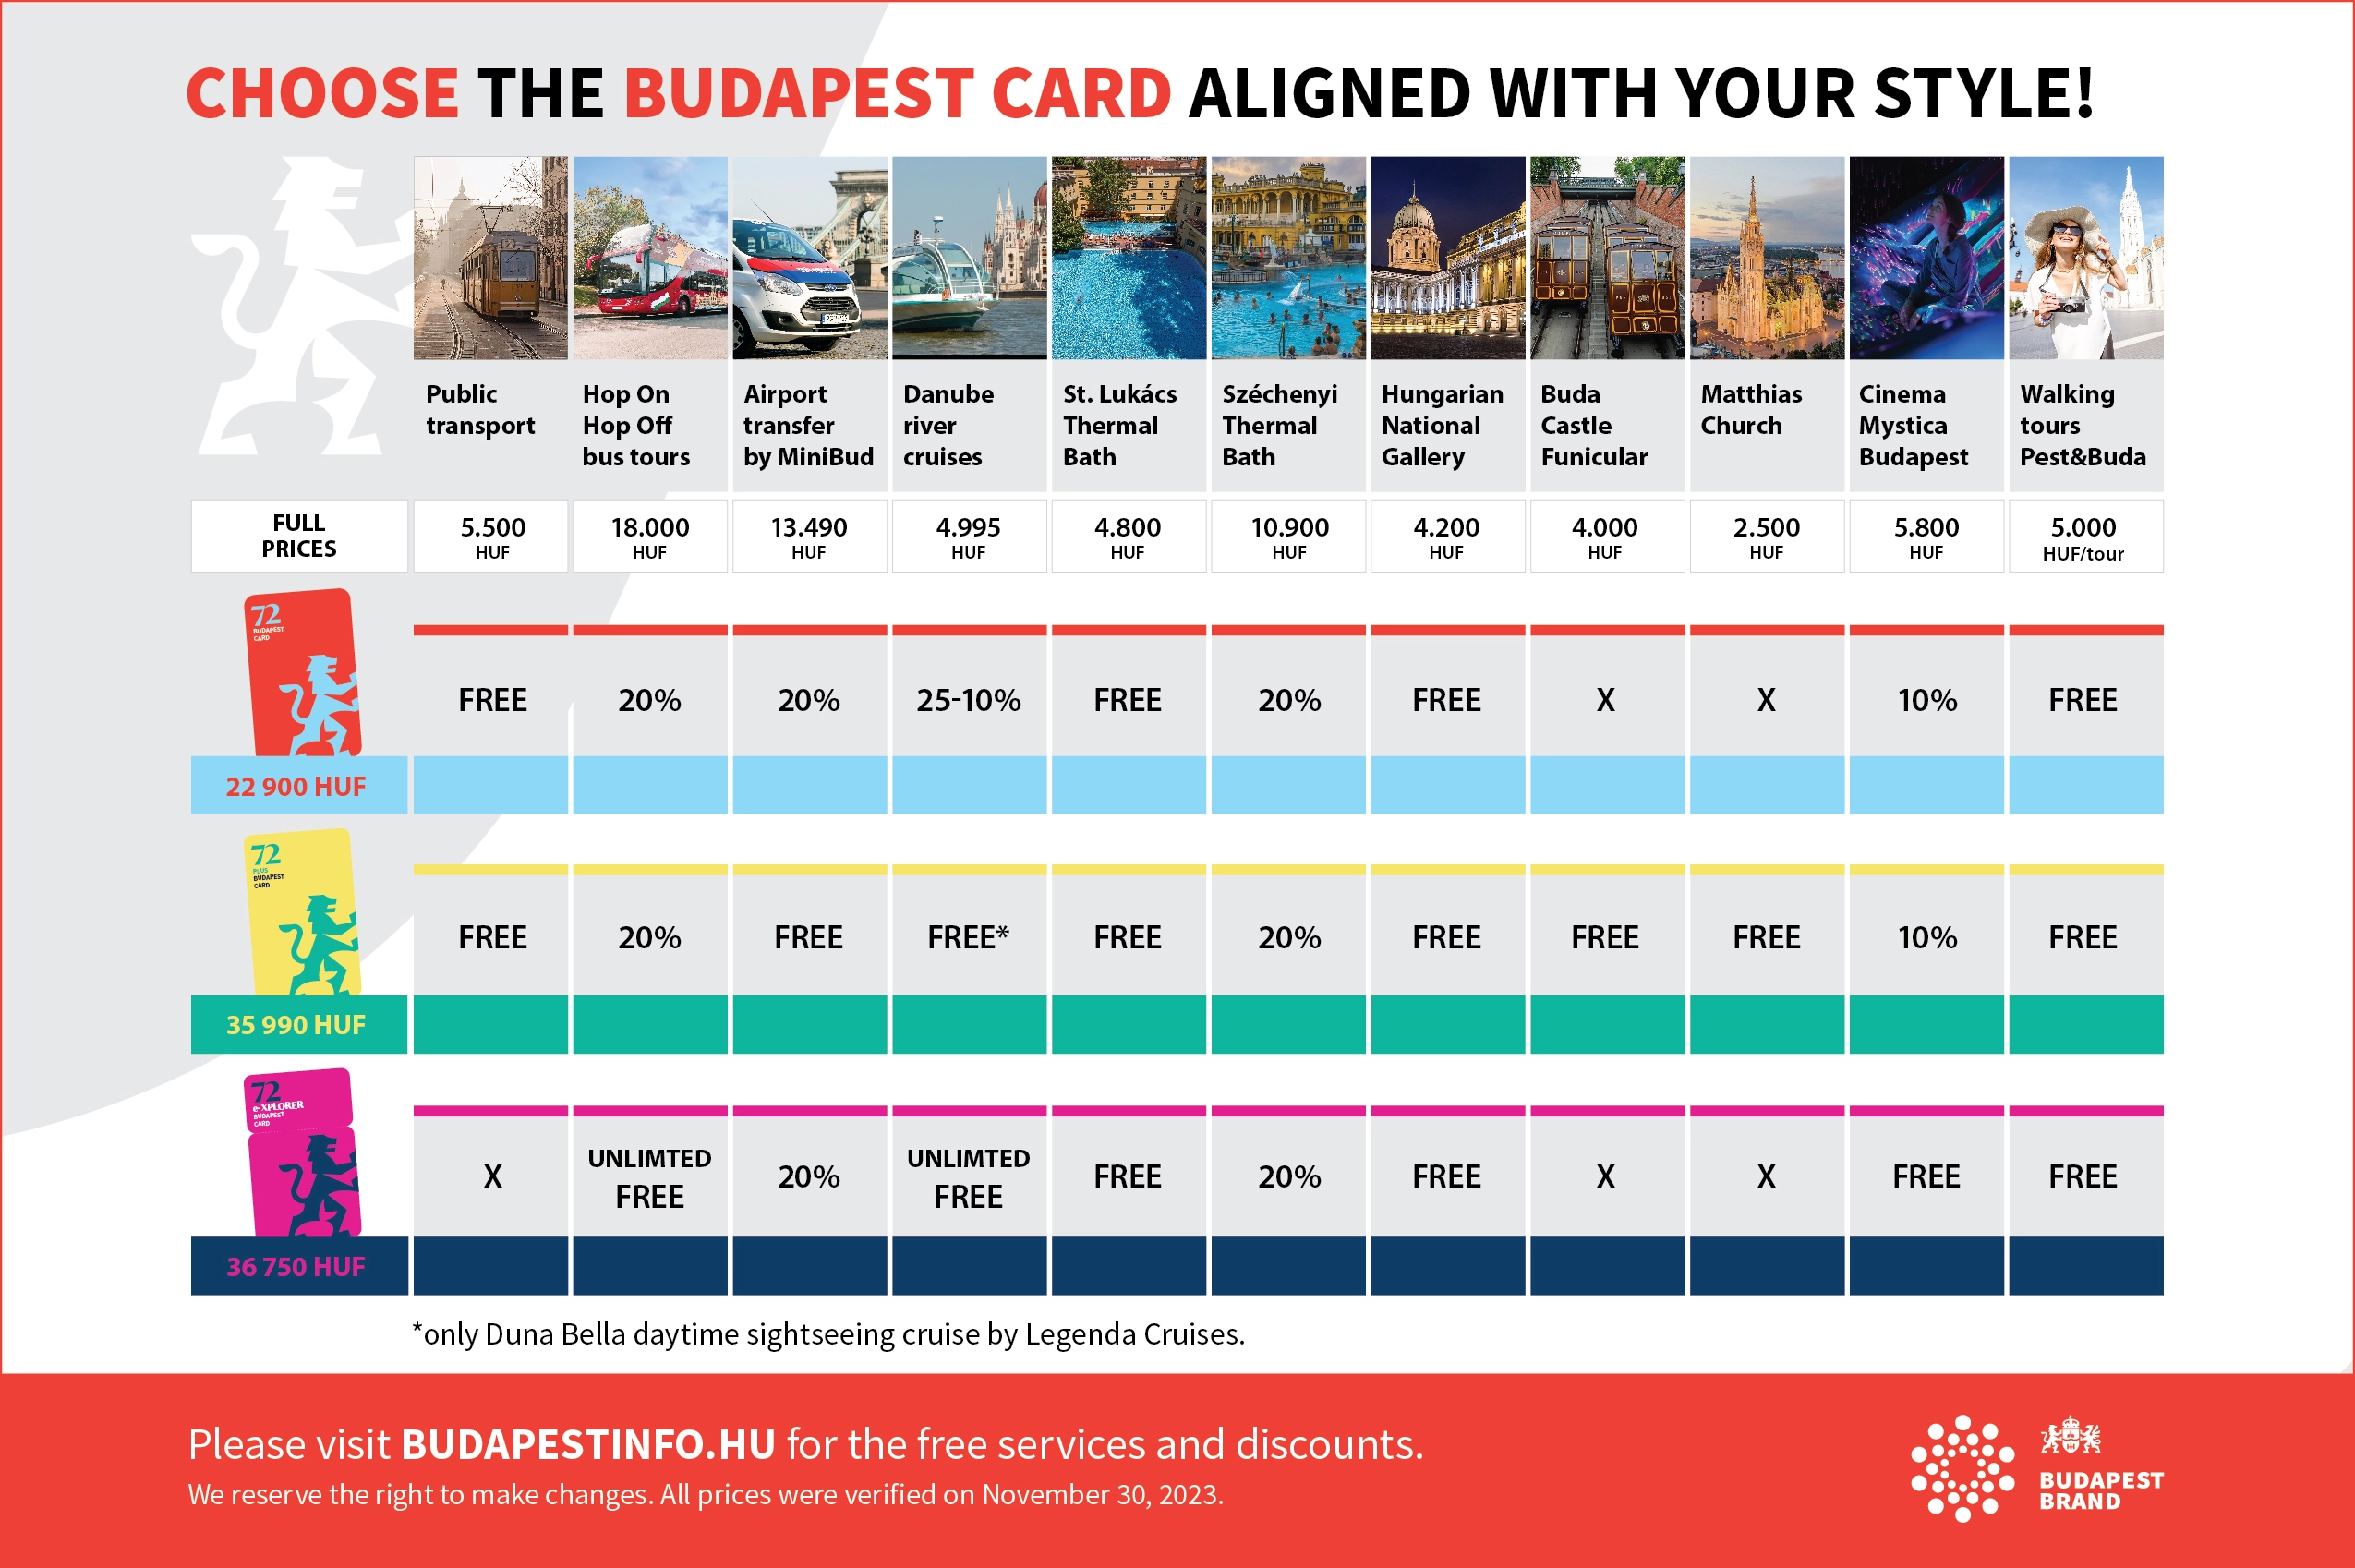 Comparison of the 3 different 72 hour Budapest Cards.